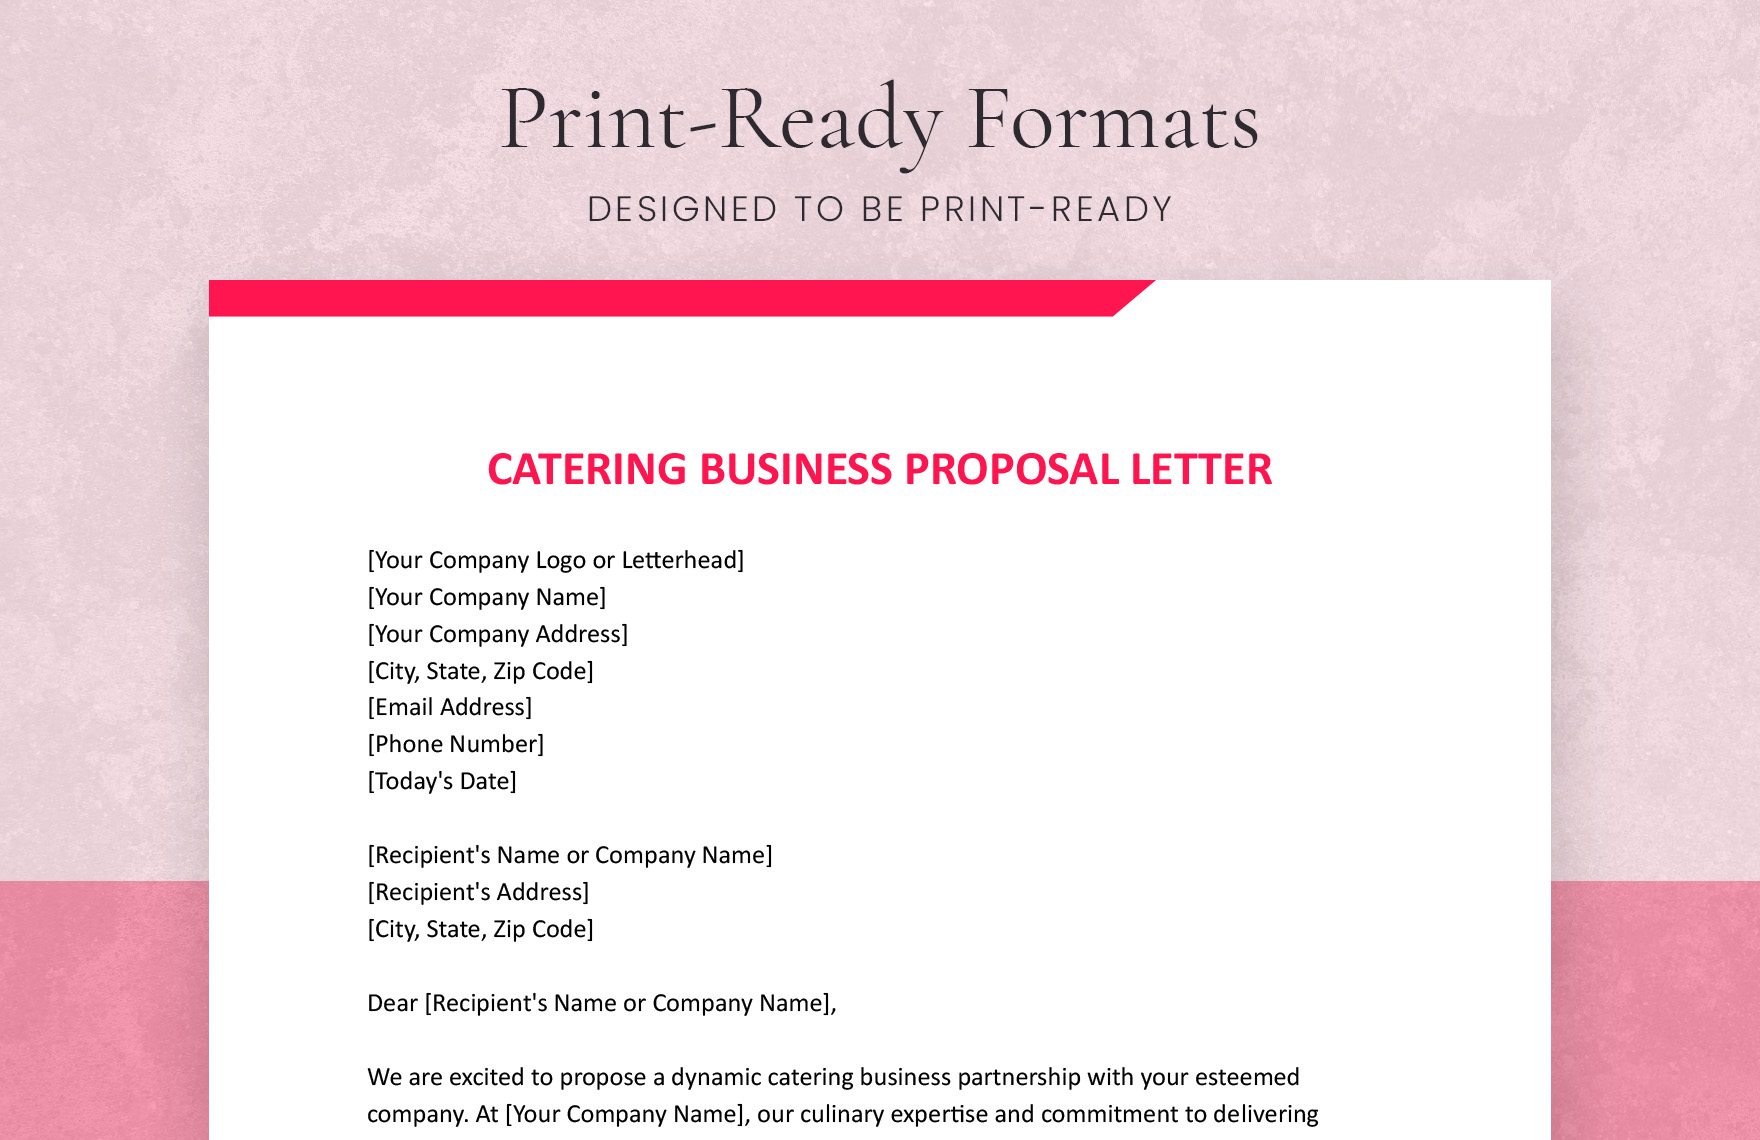 Catering Business Proposal Letter